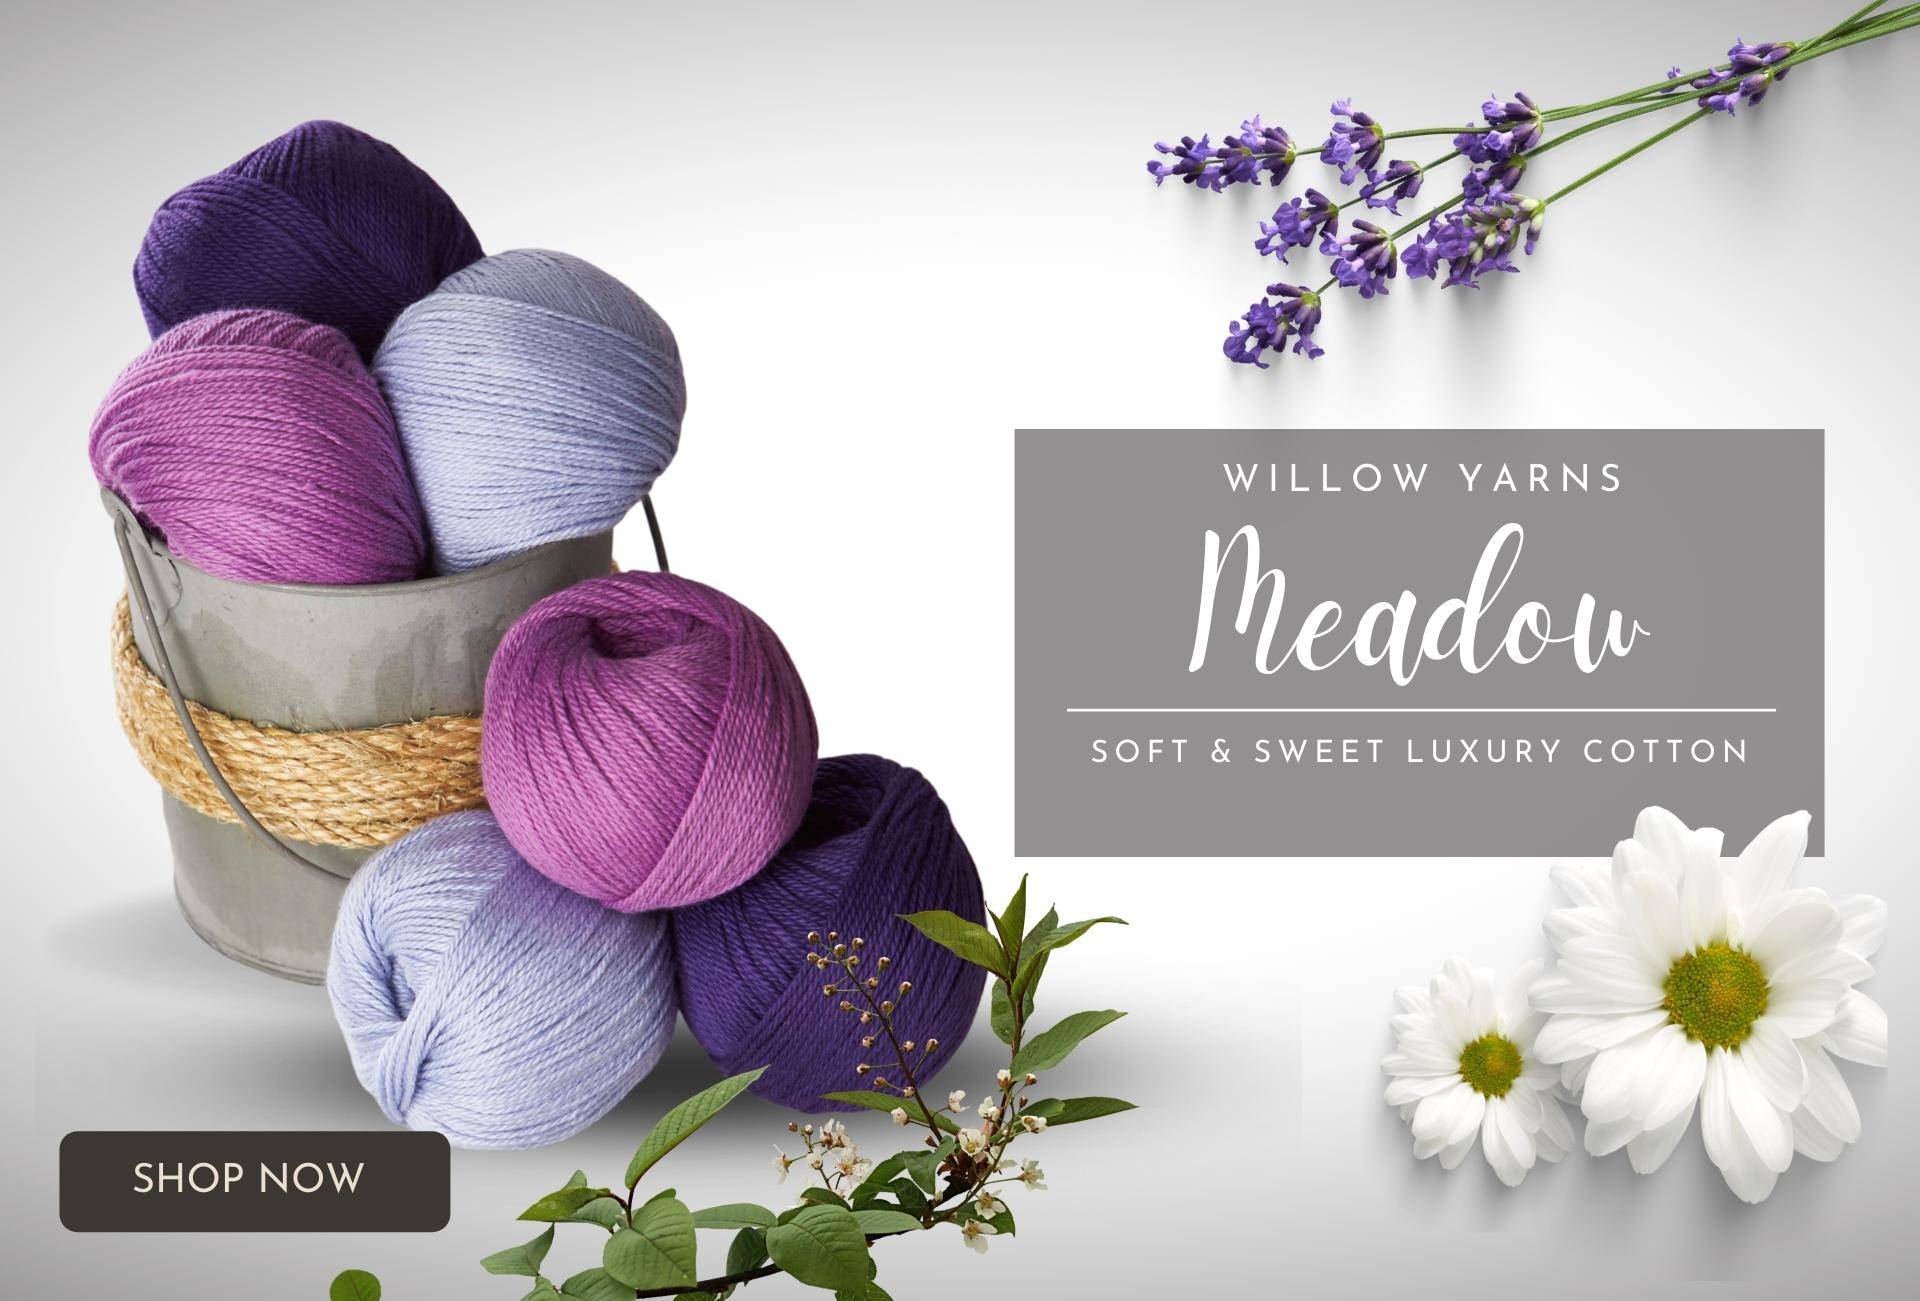 Willow Yarns Meadow Shop Now